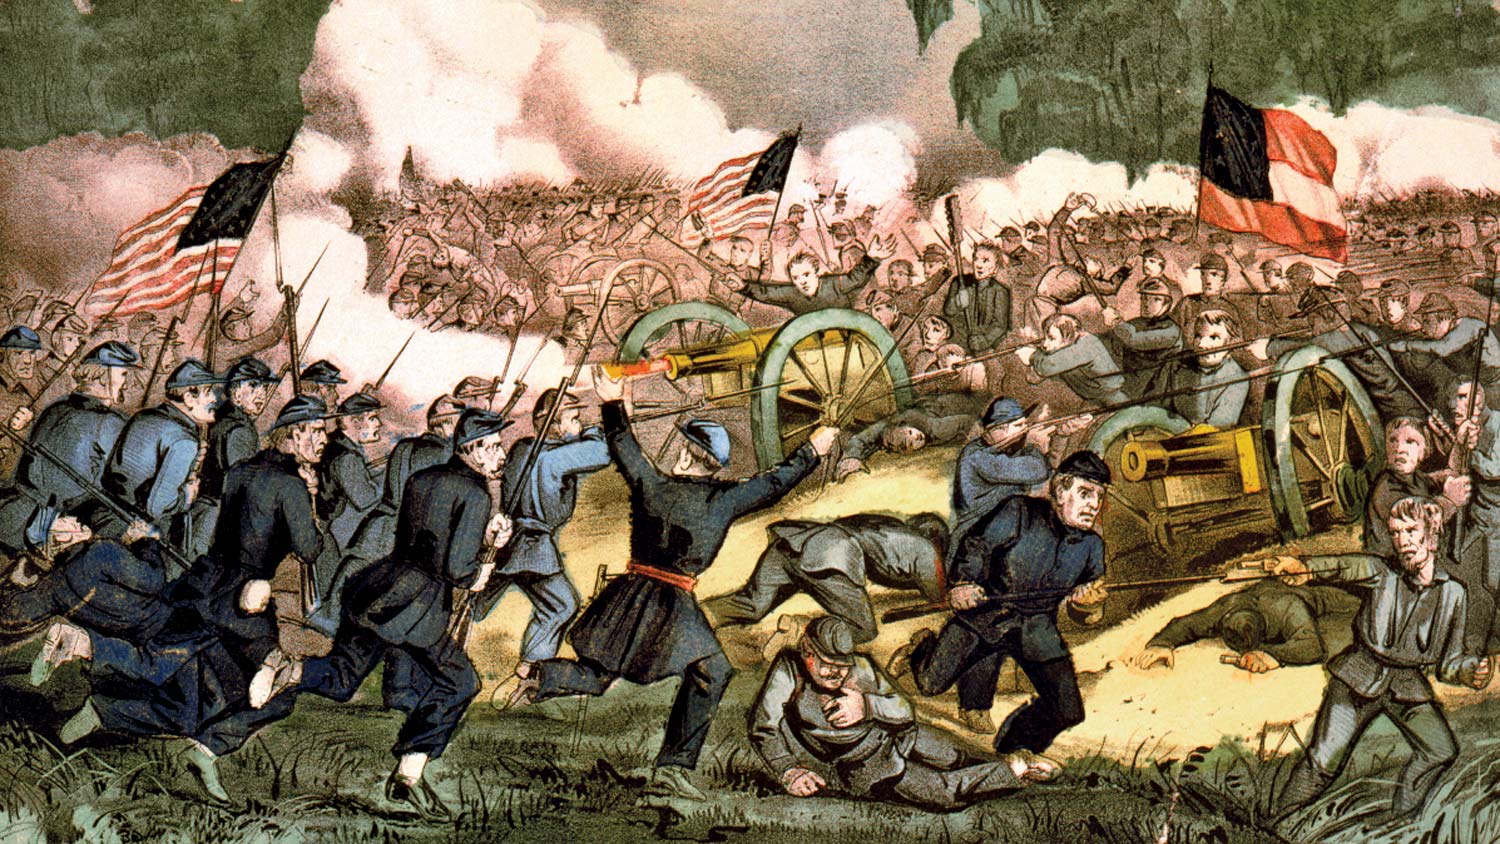 Battle of Gettysburg lithograph by Currier & Ives